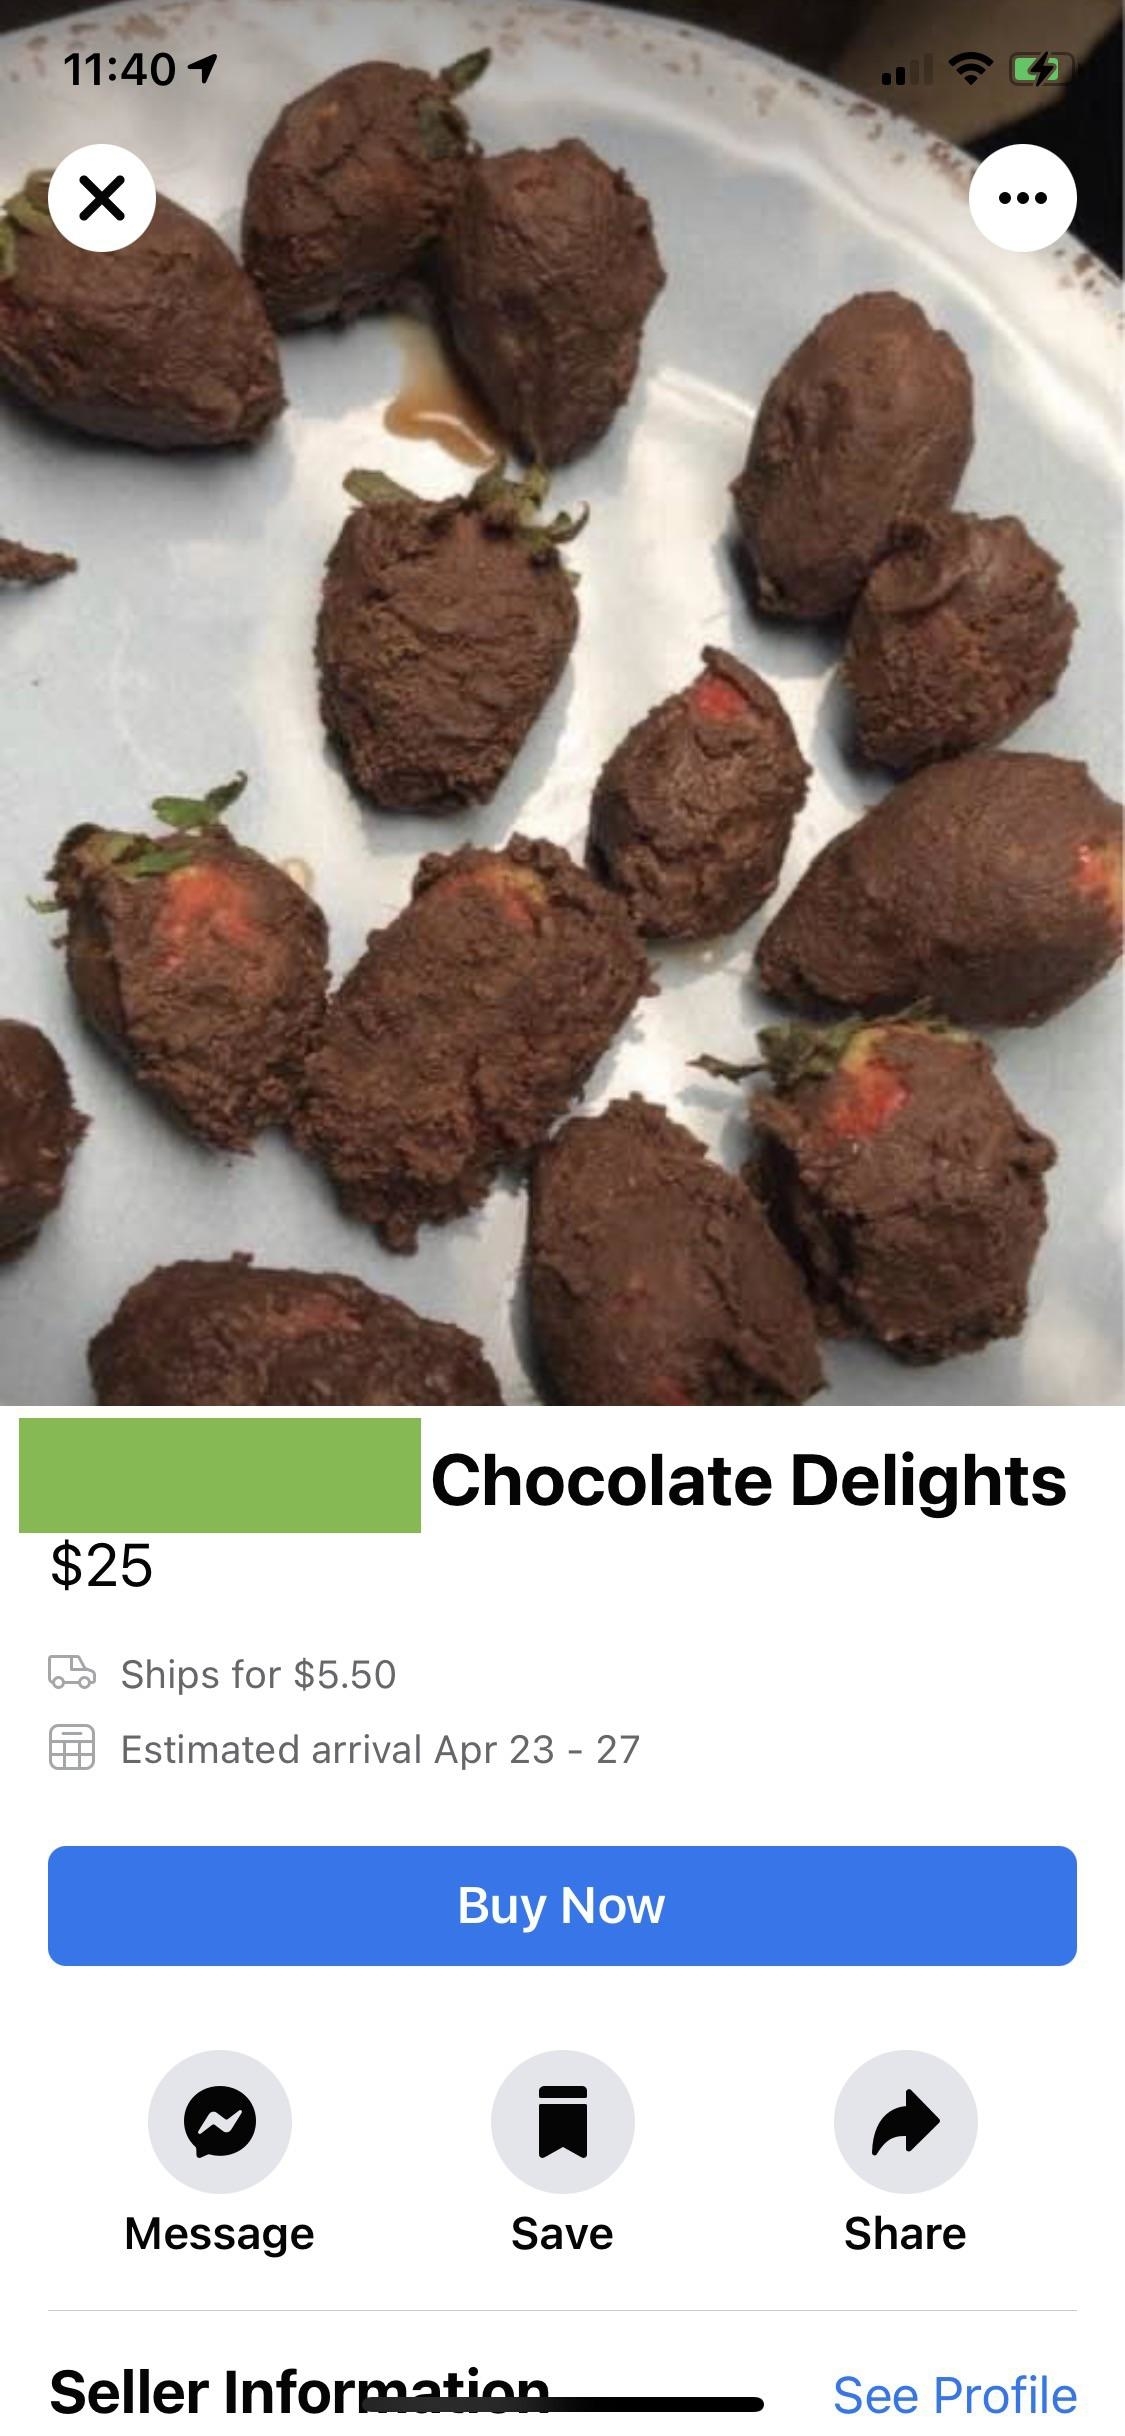 Screen capture of a marketplace listing showing off-color, uneven chocolate-covered strawberries on a plate with price ($25) and shipping ($5) details